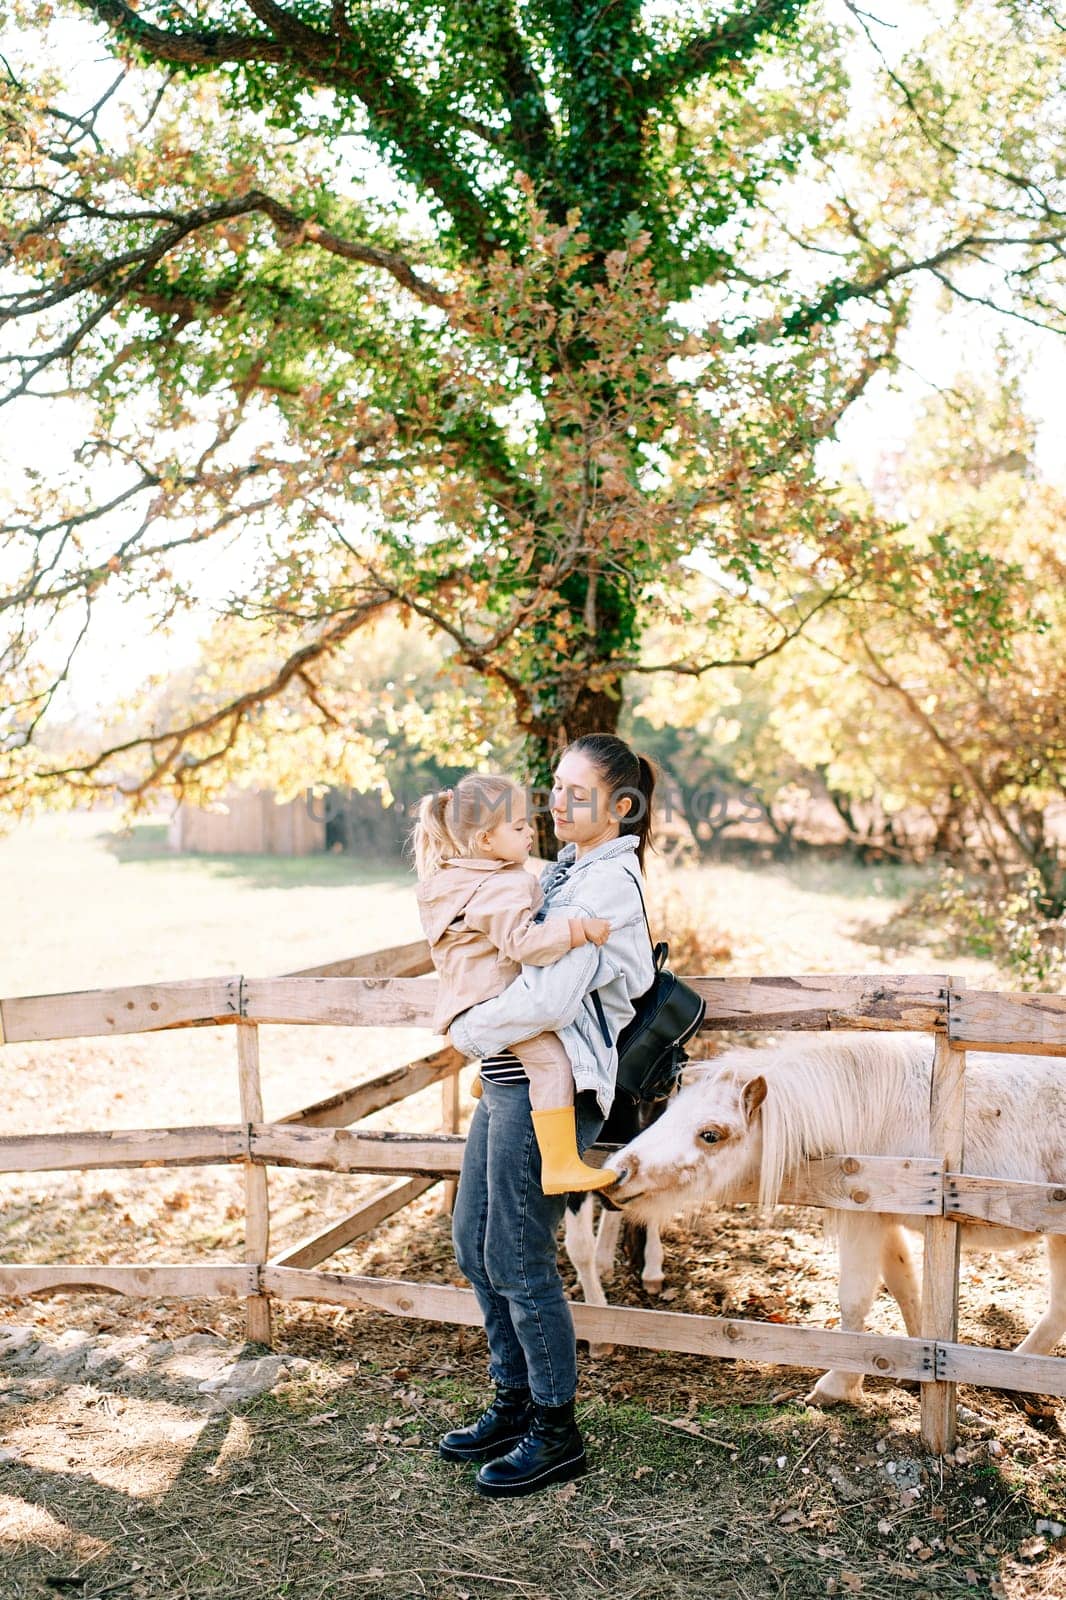 Pony sniffs the boot of a little girl sitting in her mother arms near a wooden fence in a pasture. High quality photo